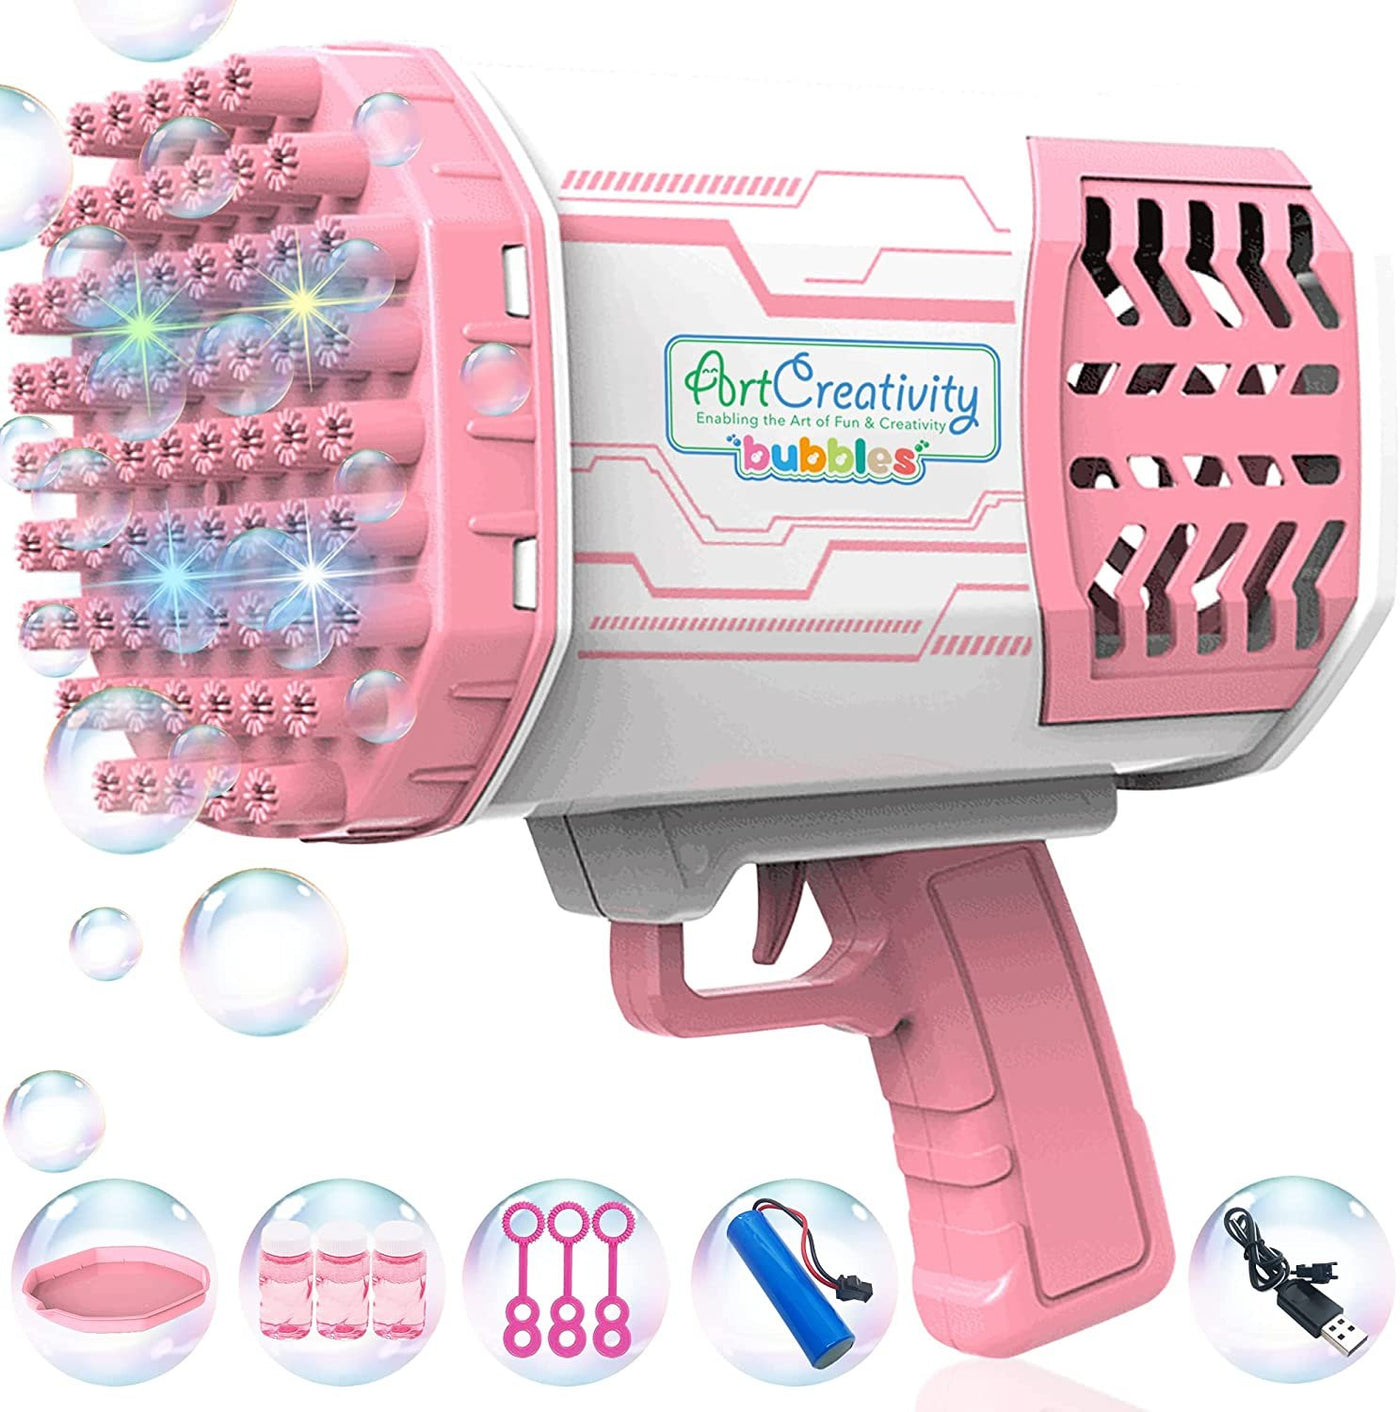  Big Rocket Boom Bubble Blower - 69 Holes Bubbles Rocket  Launcher Gun Machine with Colorful Lights for Adults Kids, Giant Foam Maker  Guns Toys Wedding Outdoor Party Favors Gift : Office Products